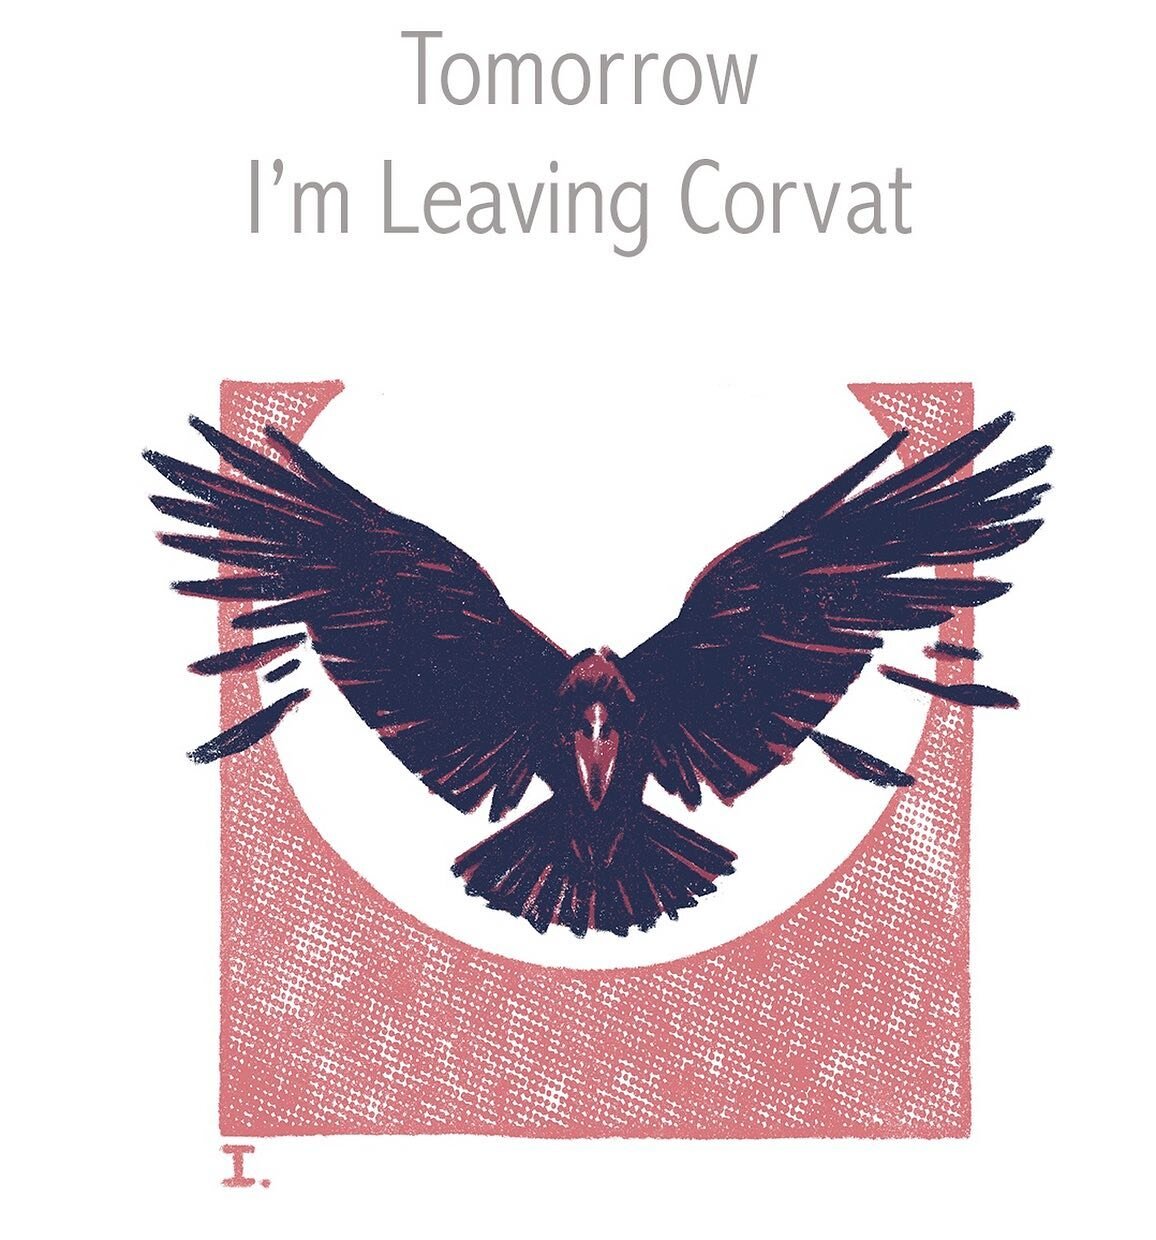 Tomorrow, my new audio drama kicks off. Its going to be a weird and wild multi-season ride. I hope you&rsquo;re coming along for it. #audiodrama #audiodramasunday #leavingcorvat #fictionpodcast